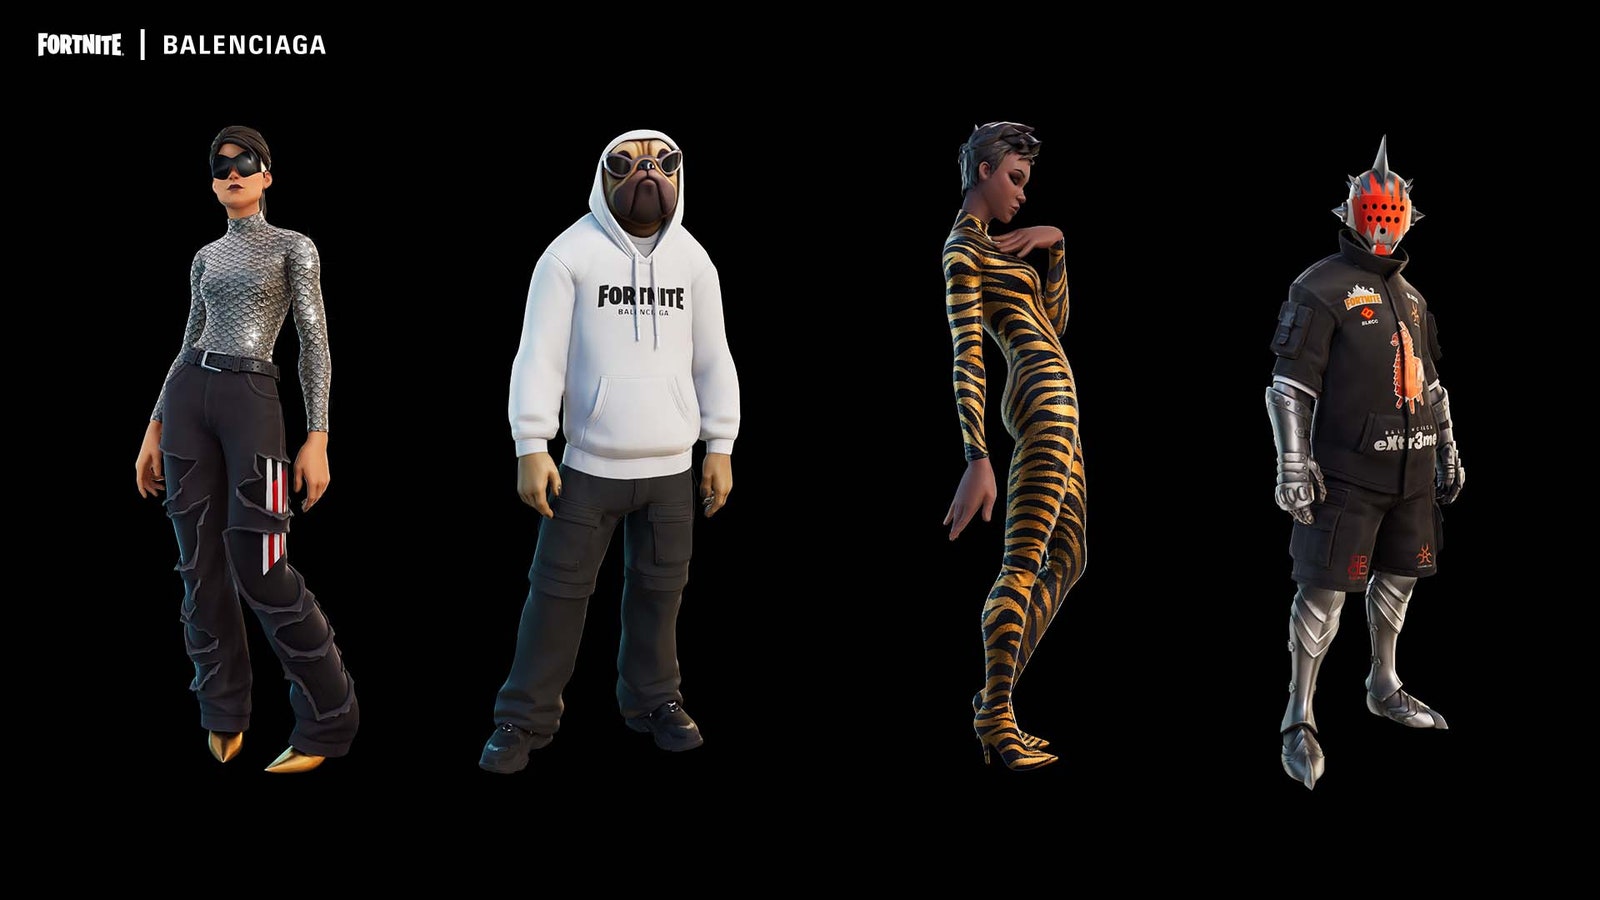 Balenciaga X Fortnite collection featured four Fortnite characters 